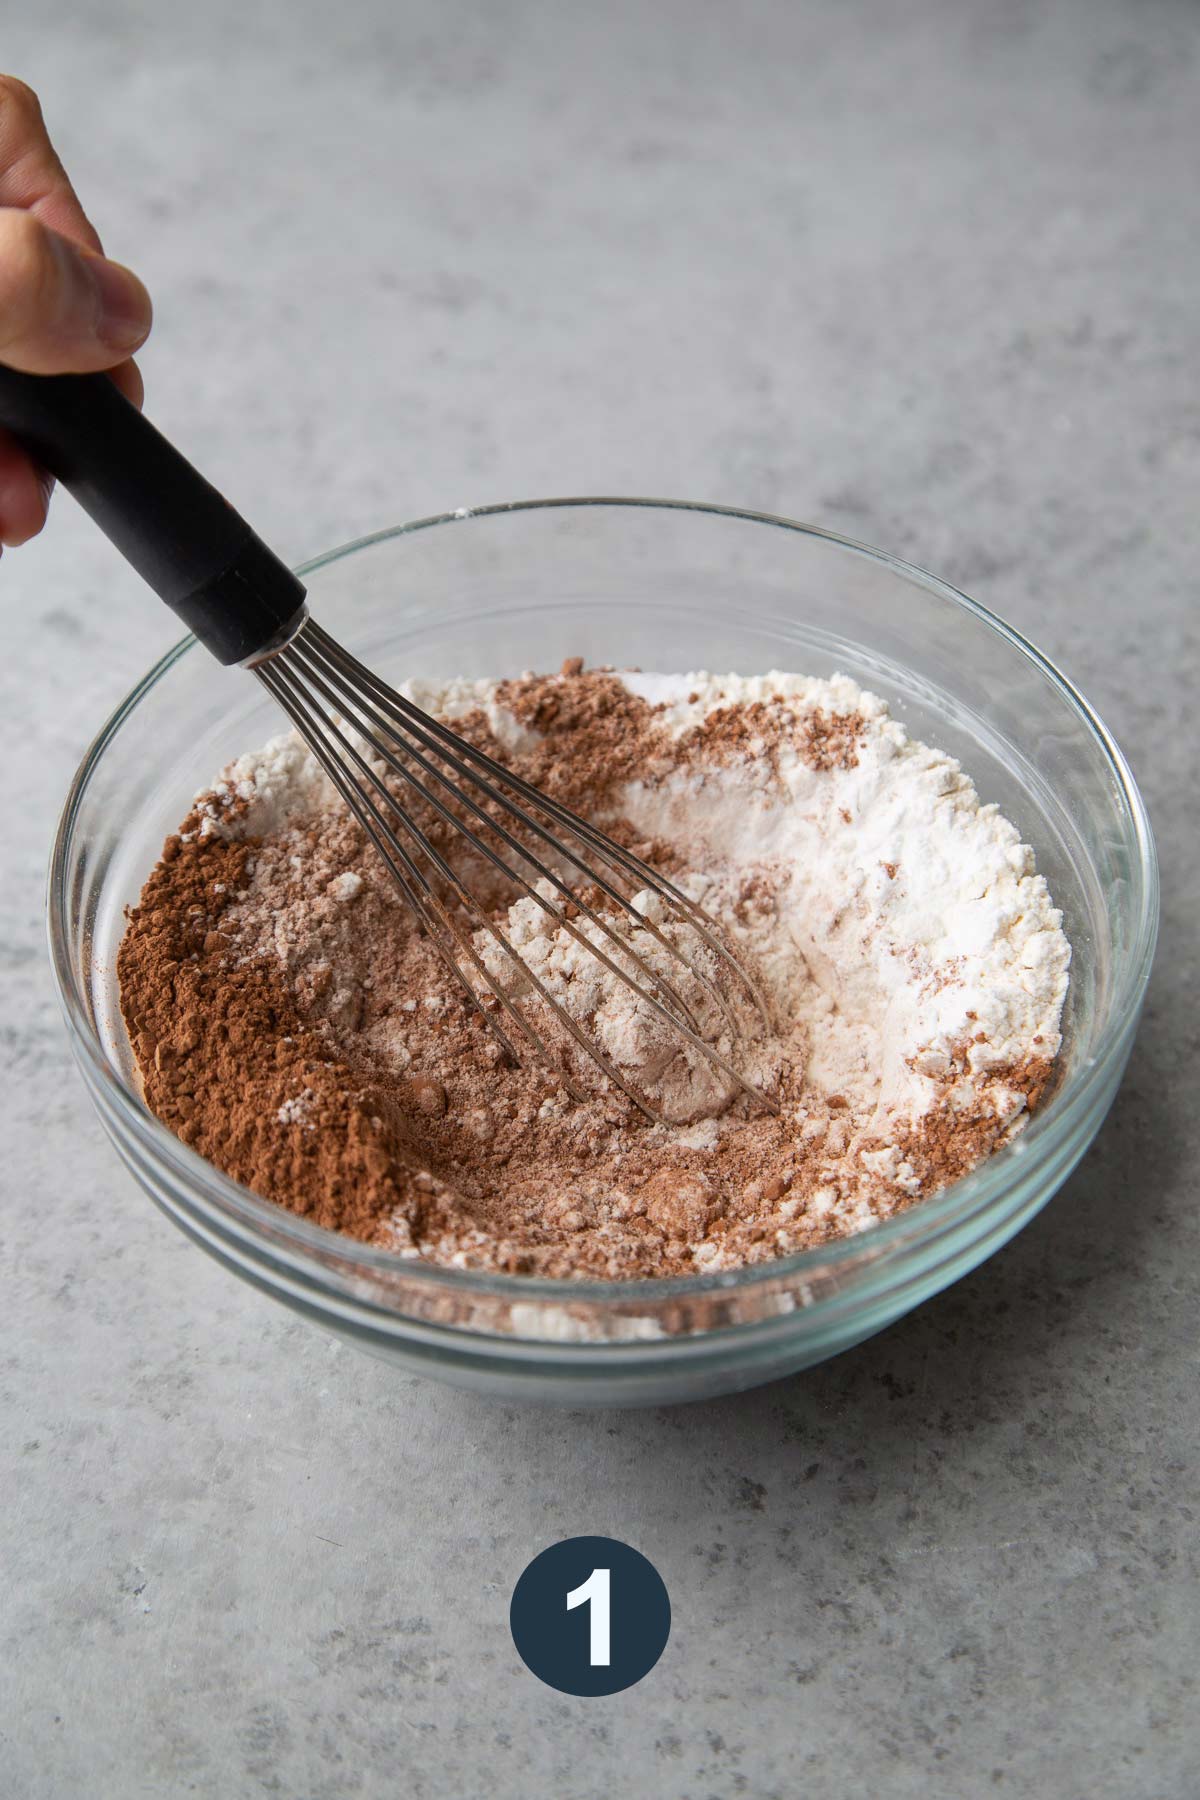 whisk together flour, cocoa powder, baking powder, and salt in bowl.